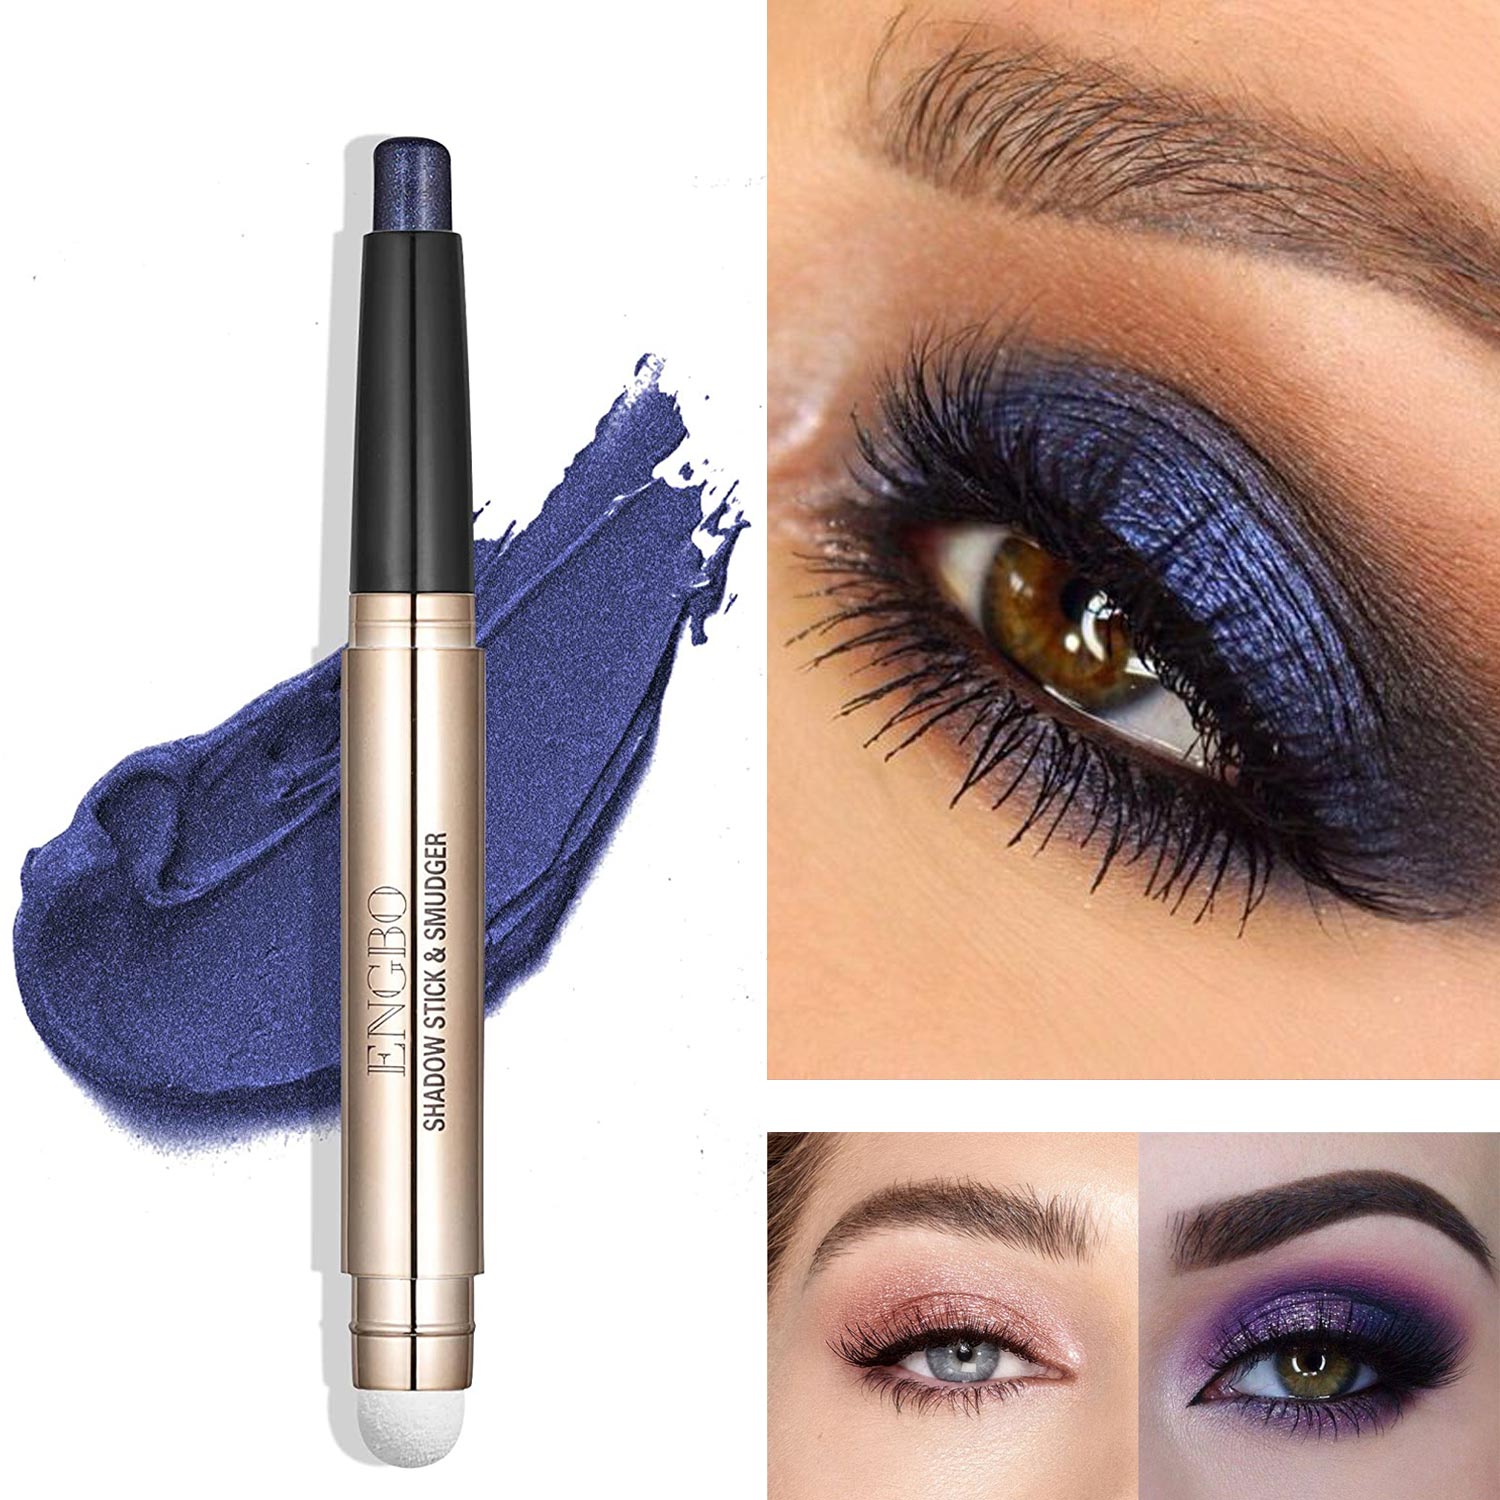 

Double Eyeshadow Stick with Smudger Creamy Eyes Shadow Pencil and Blending Brush Shimmer Blue Red Green Make Up, 01